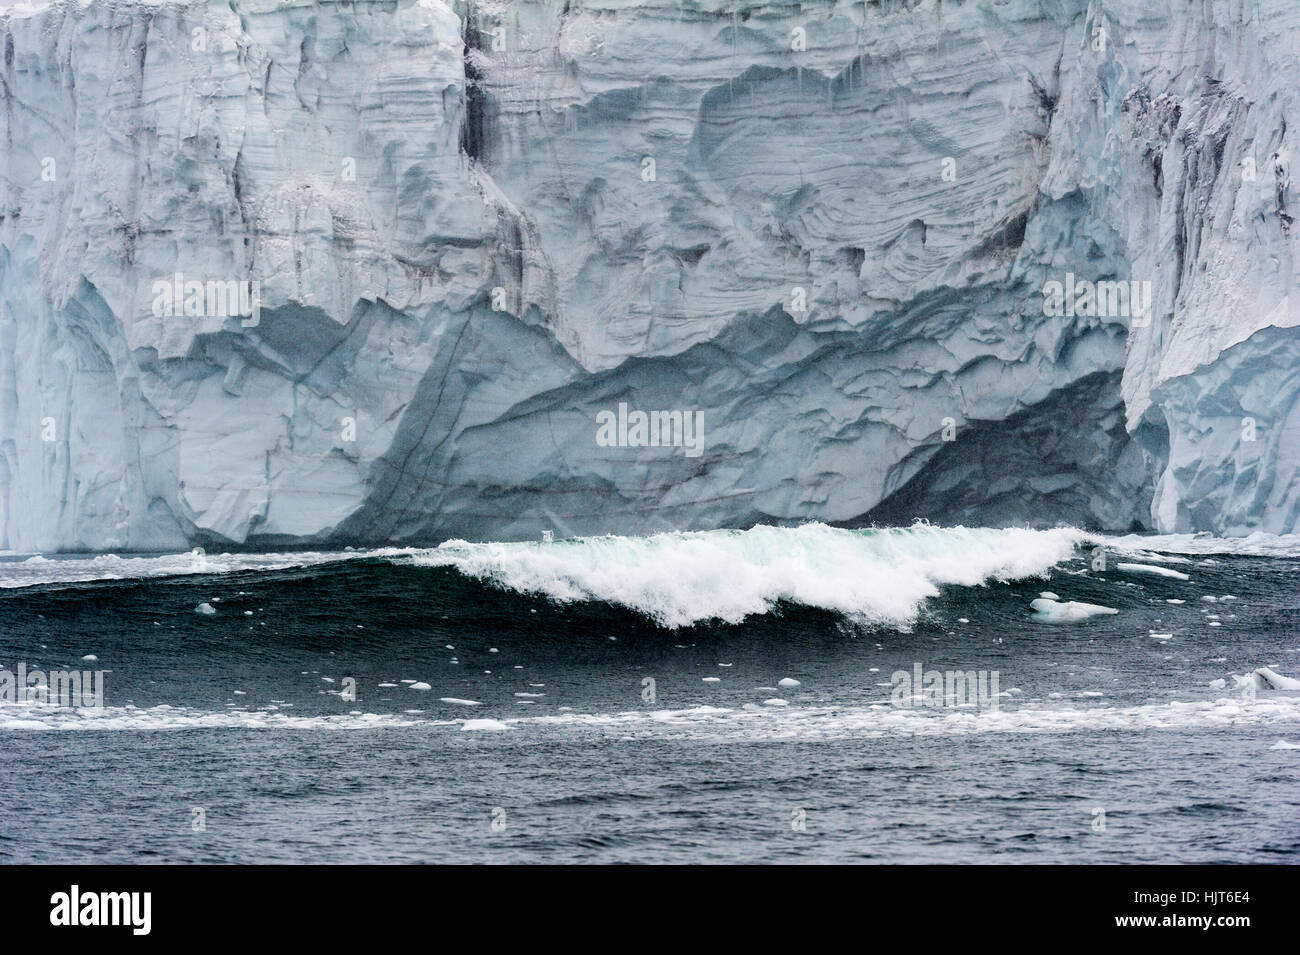 Ice falling from a glacier into the ocean creates huge waves. Stock Photo